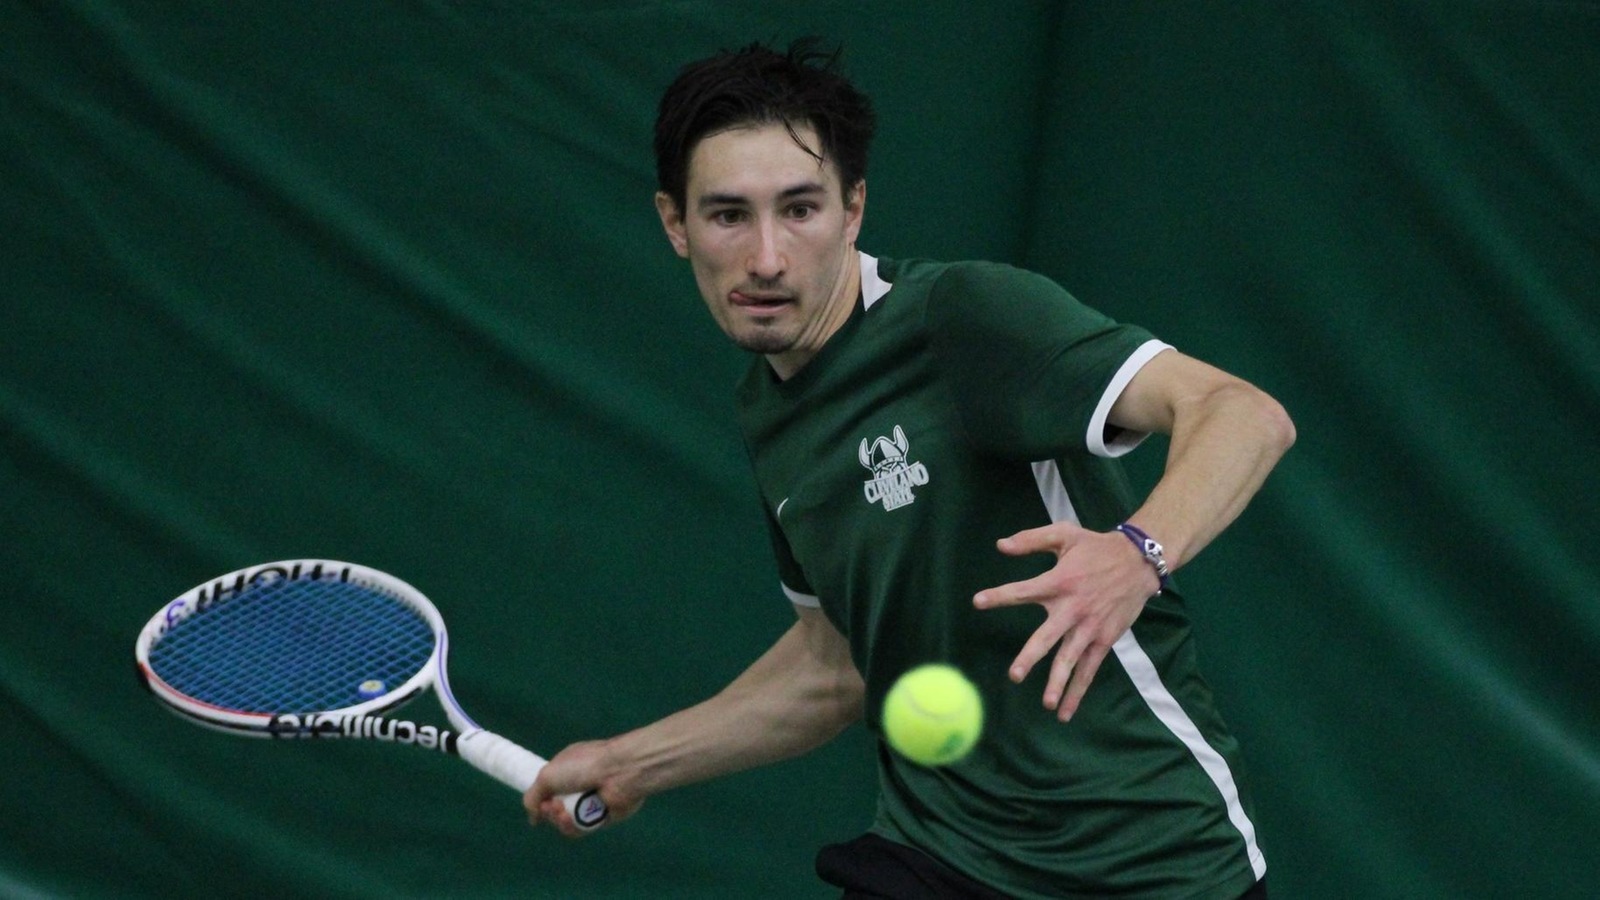 Cleveland State Men&rsquo;s Tennis Opens #HLTennis Play With 5-2 Win Over IUPUI